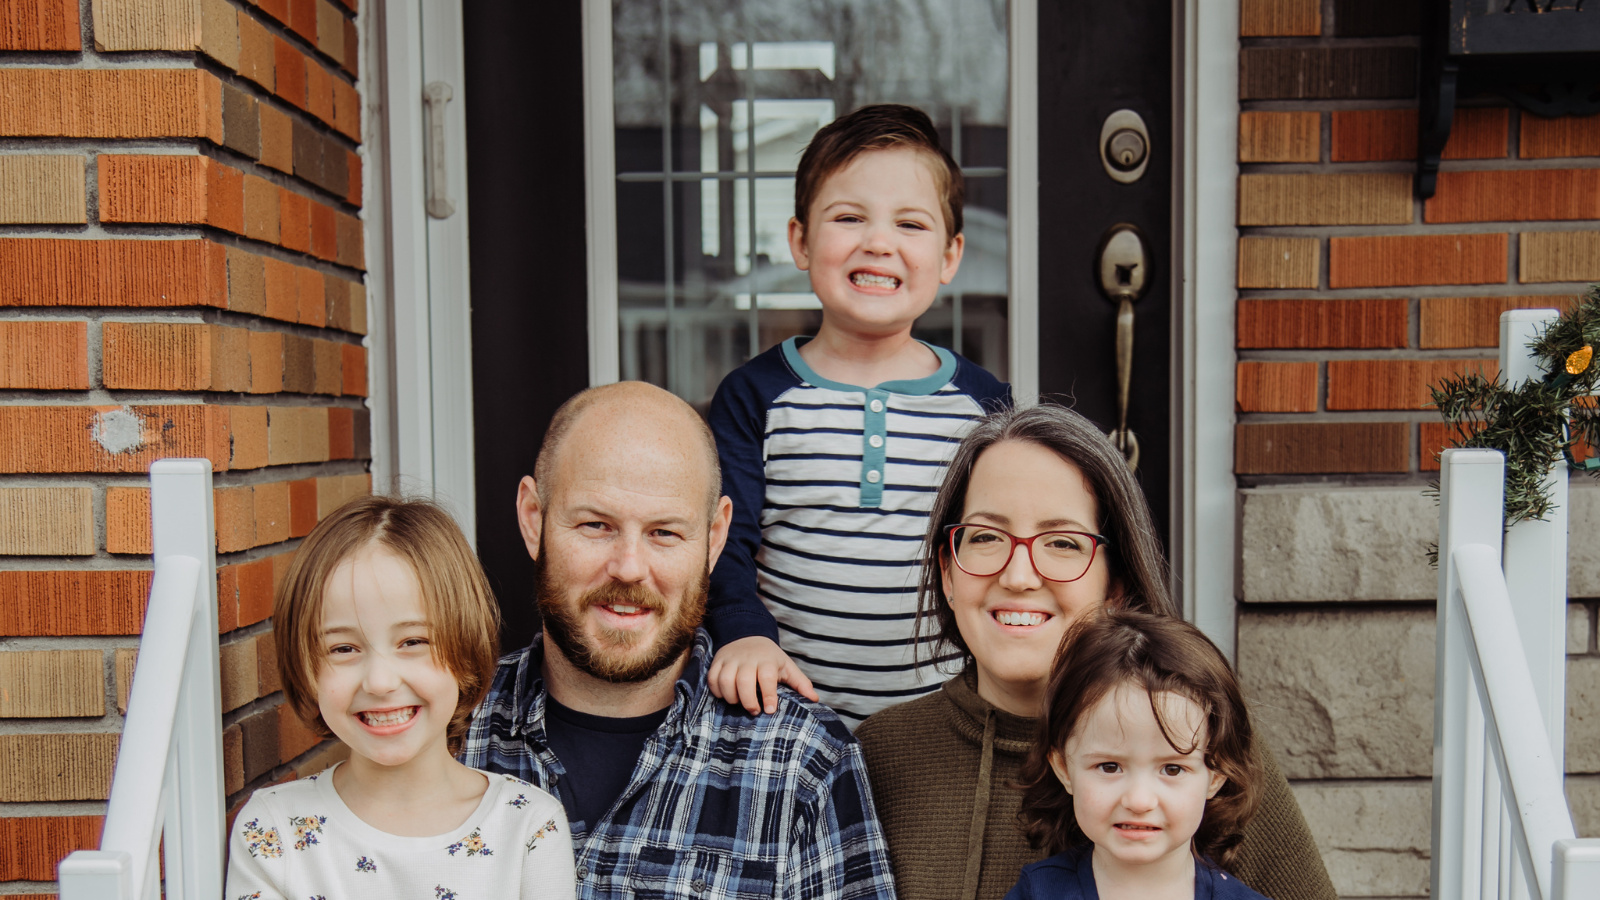 Meet the Wilson Family, from Cornwall, ON.